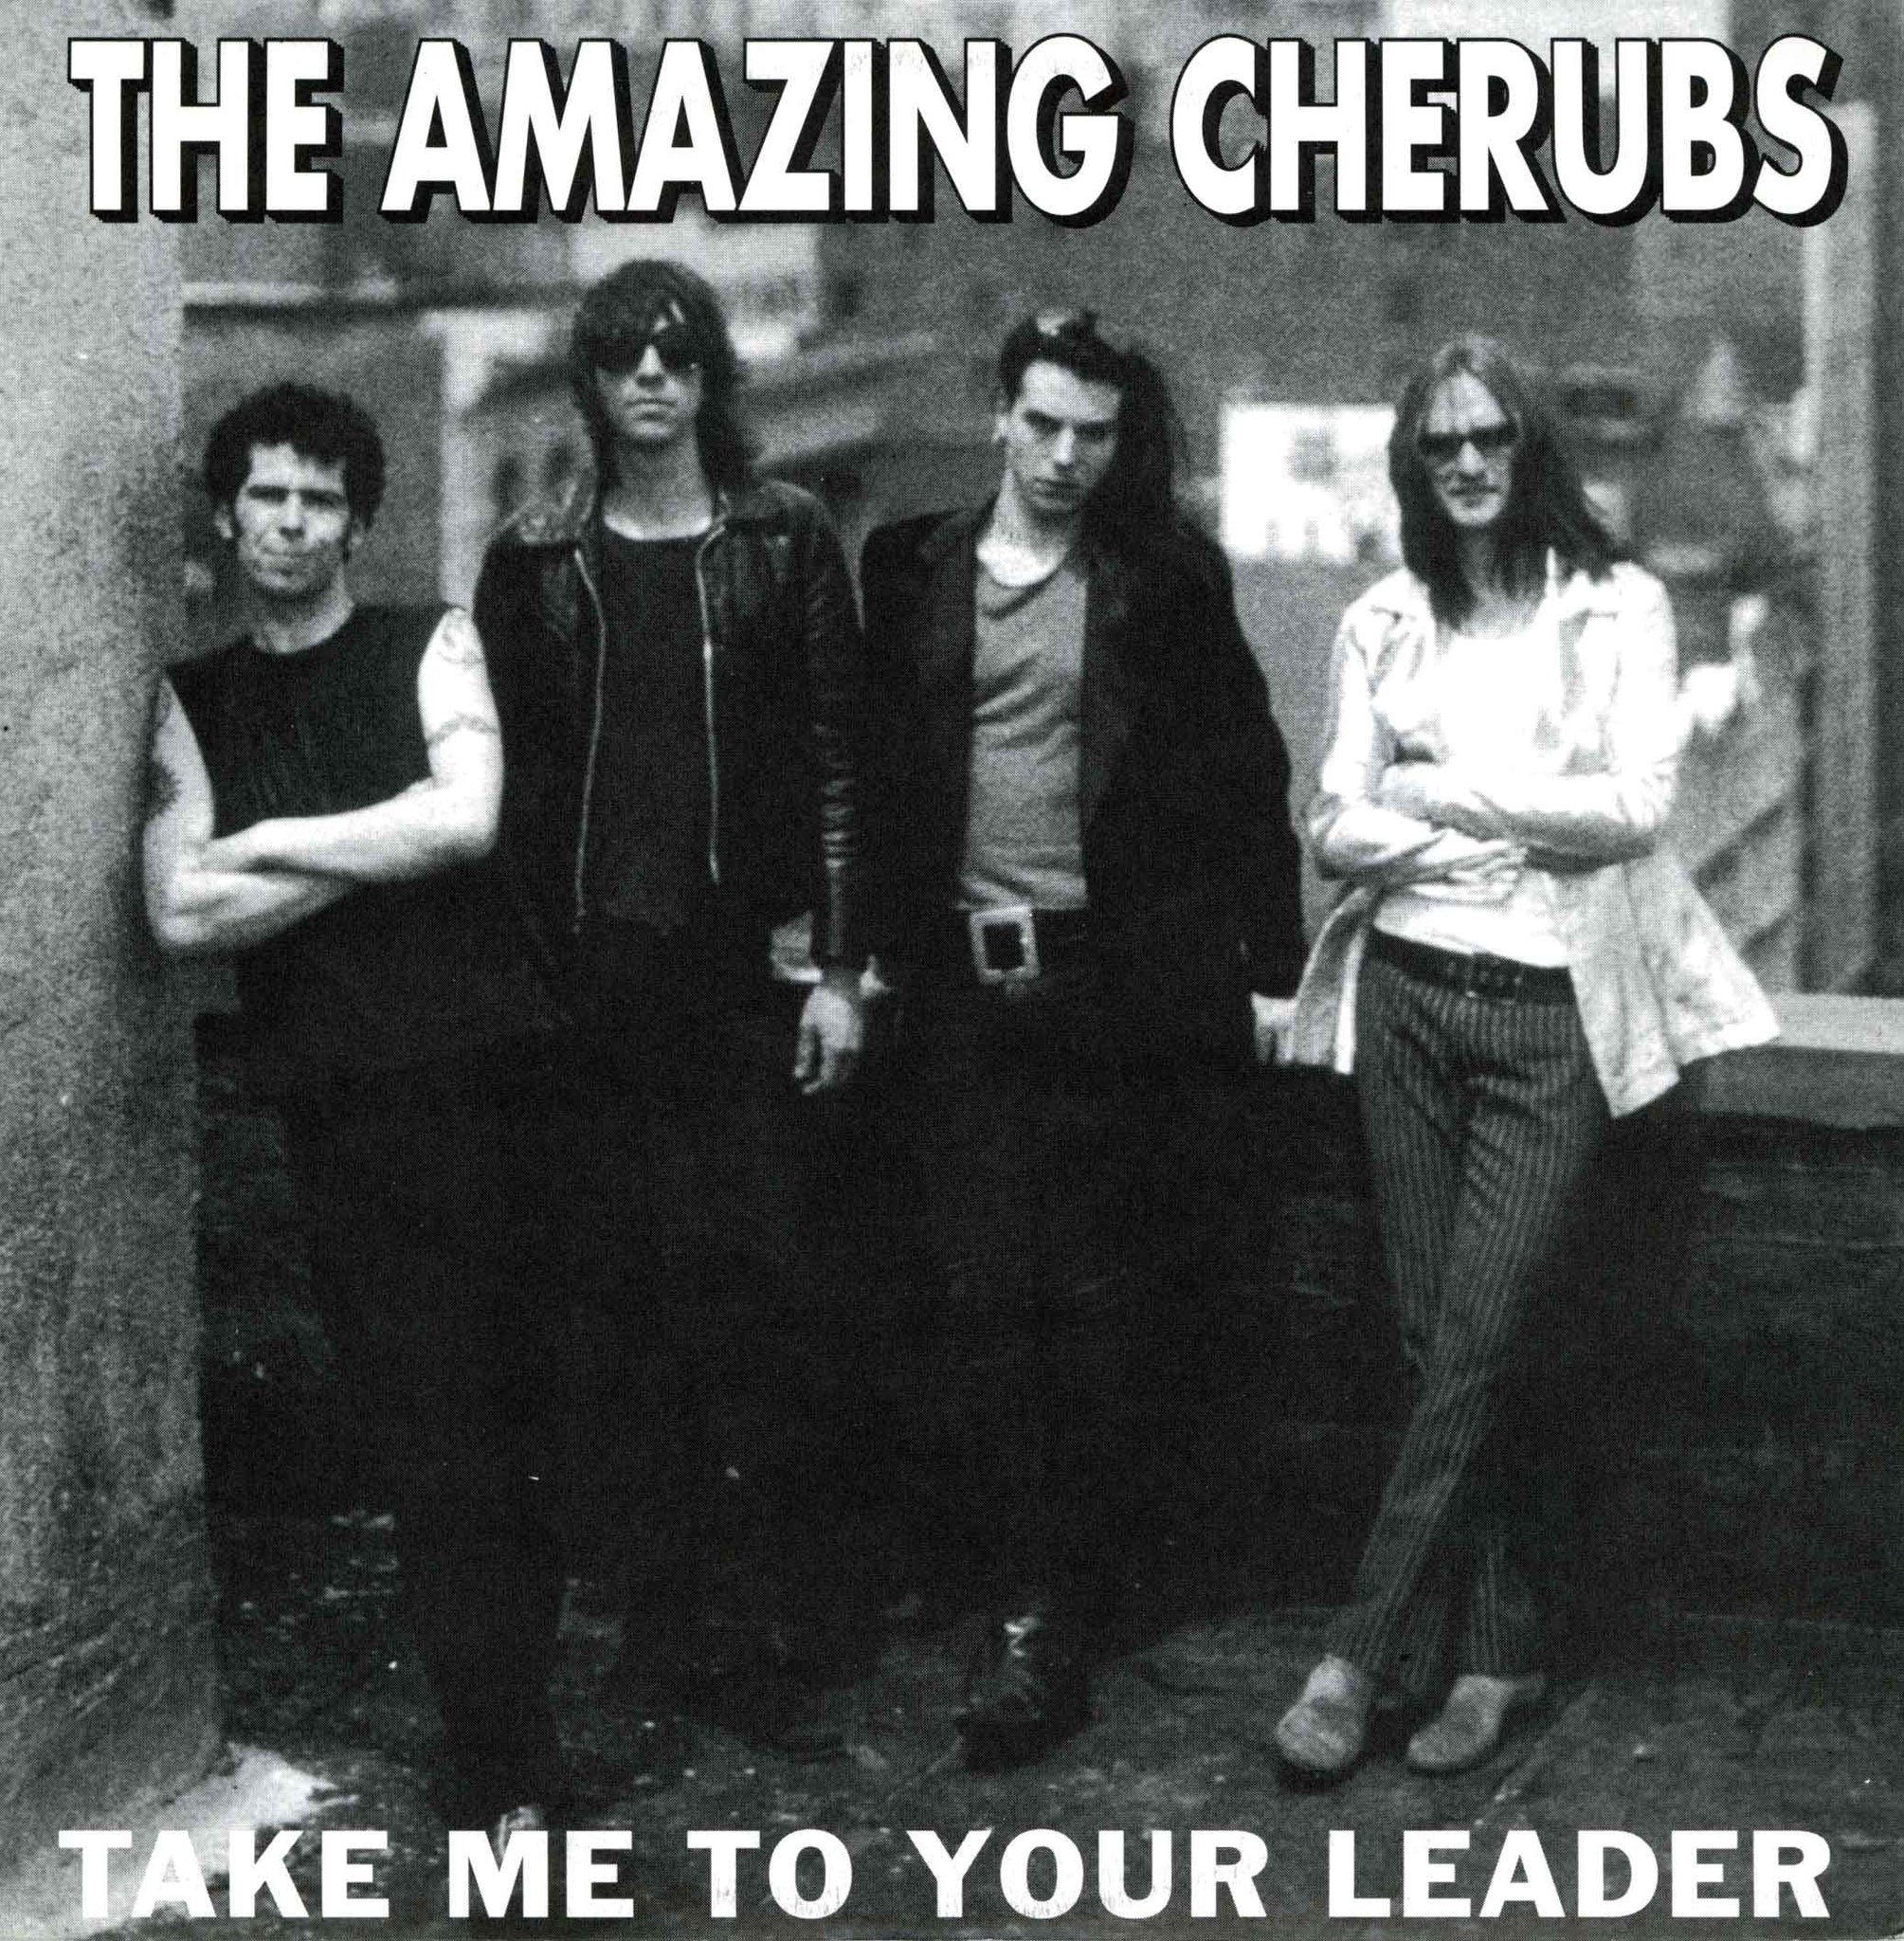 The Amazing Cherubs - Take Me to Your Leader b/w The Lazy Pony - Monoroid